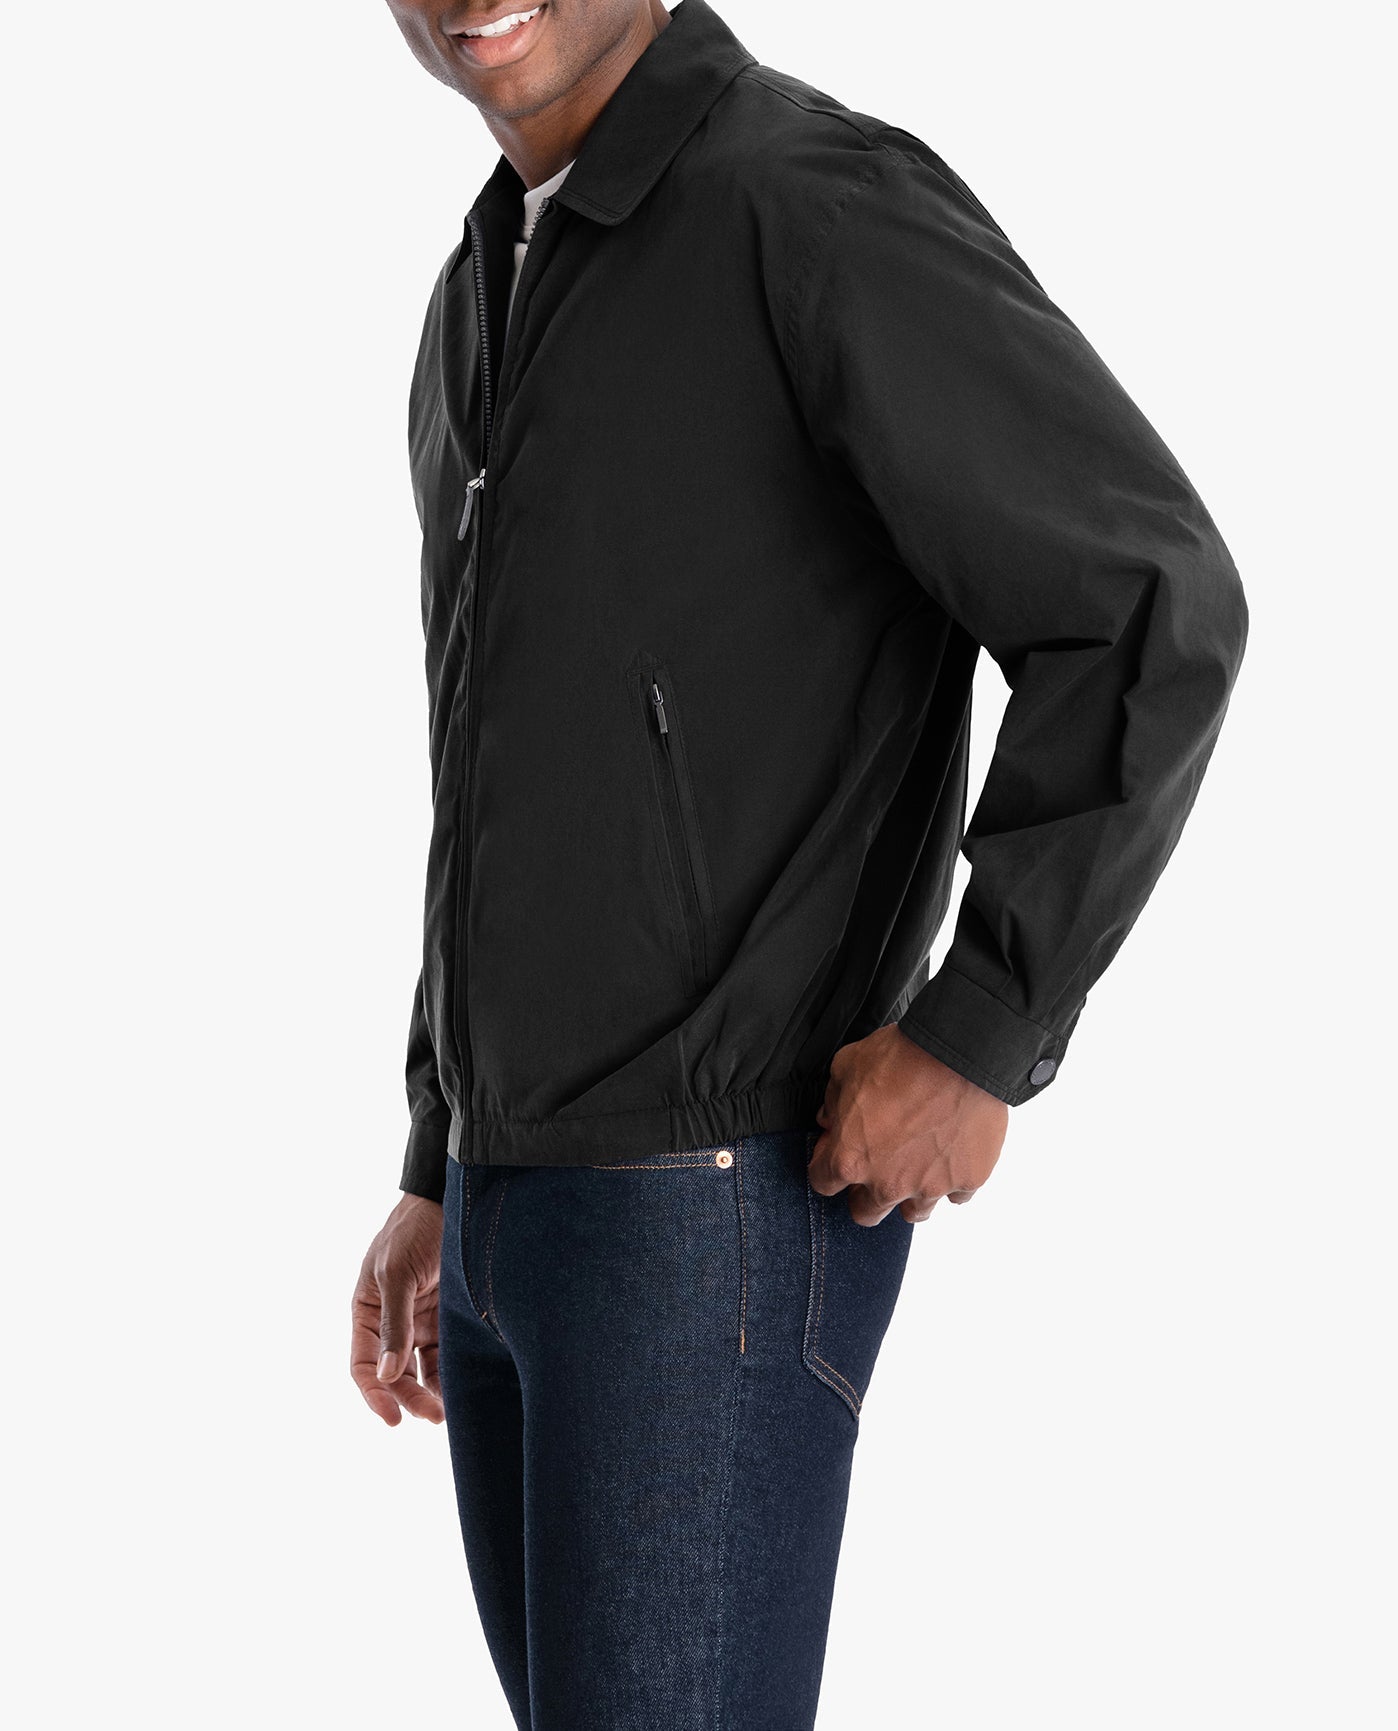 BACK VIEW OF EXTENDED LIGHT WEIGHT ZIP FRONT GOLF JACKET | BLACK